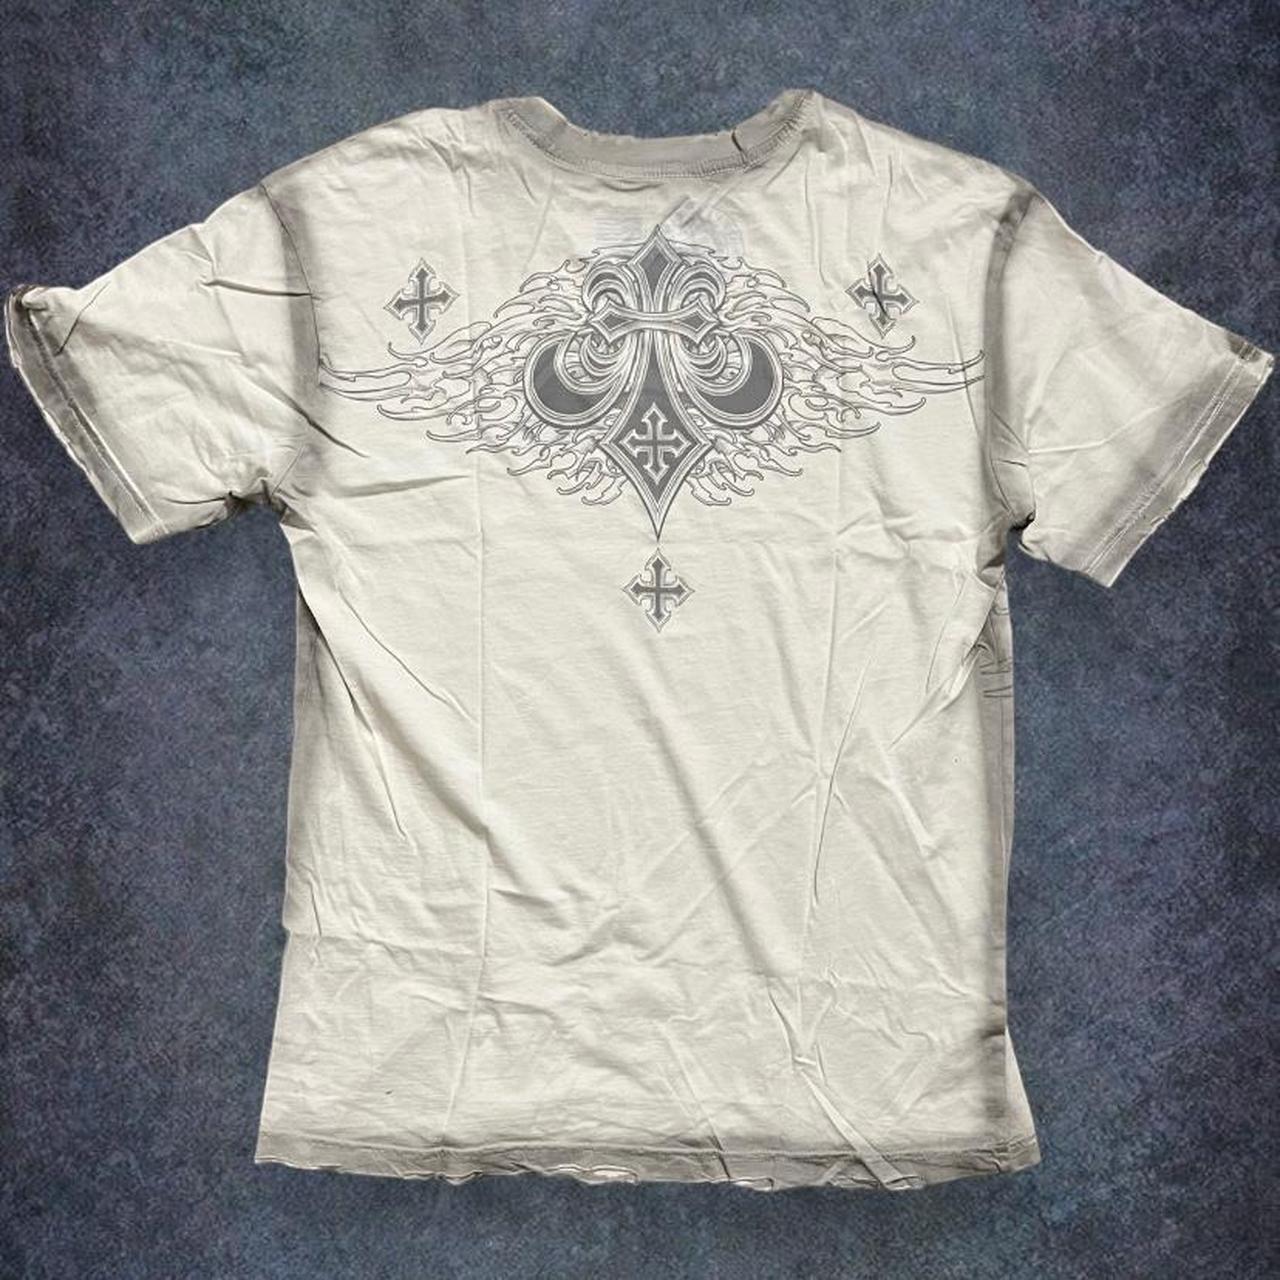 Affliction Men's Grey and White T-shirt (3)